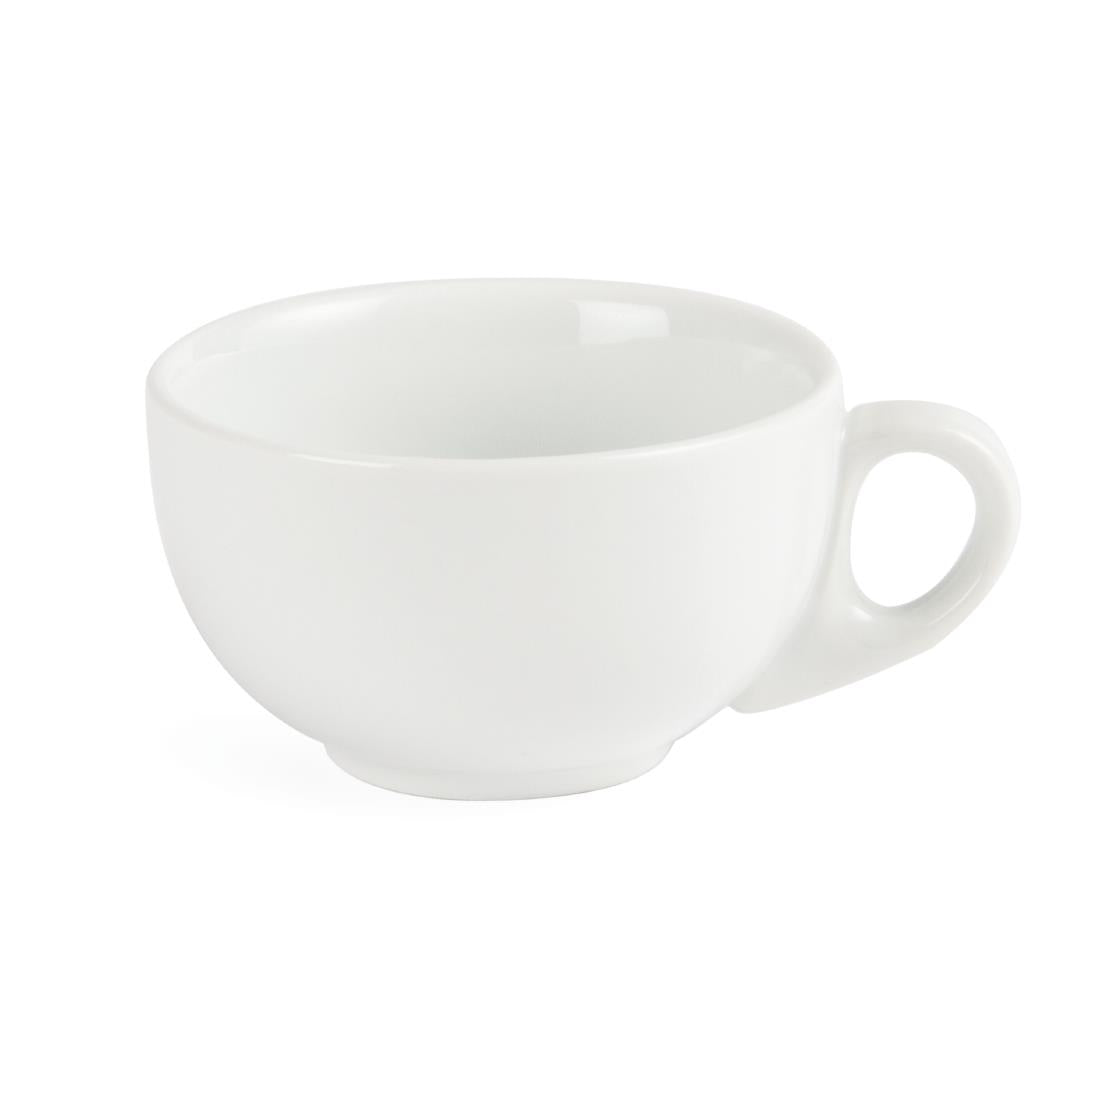 CB462 Olympia Whiteware Cappuccino Cups 10oz 284ml (Pack of 12)